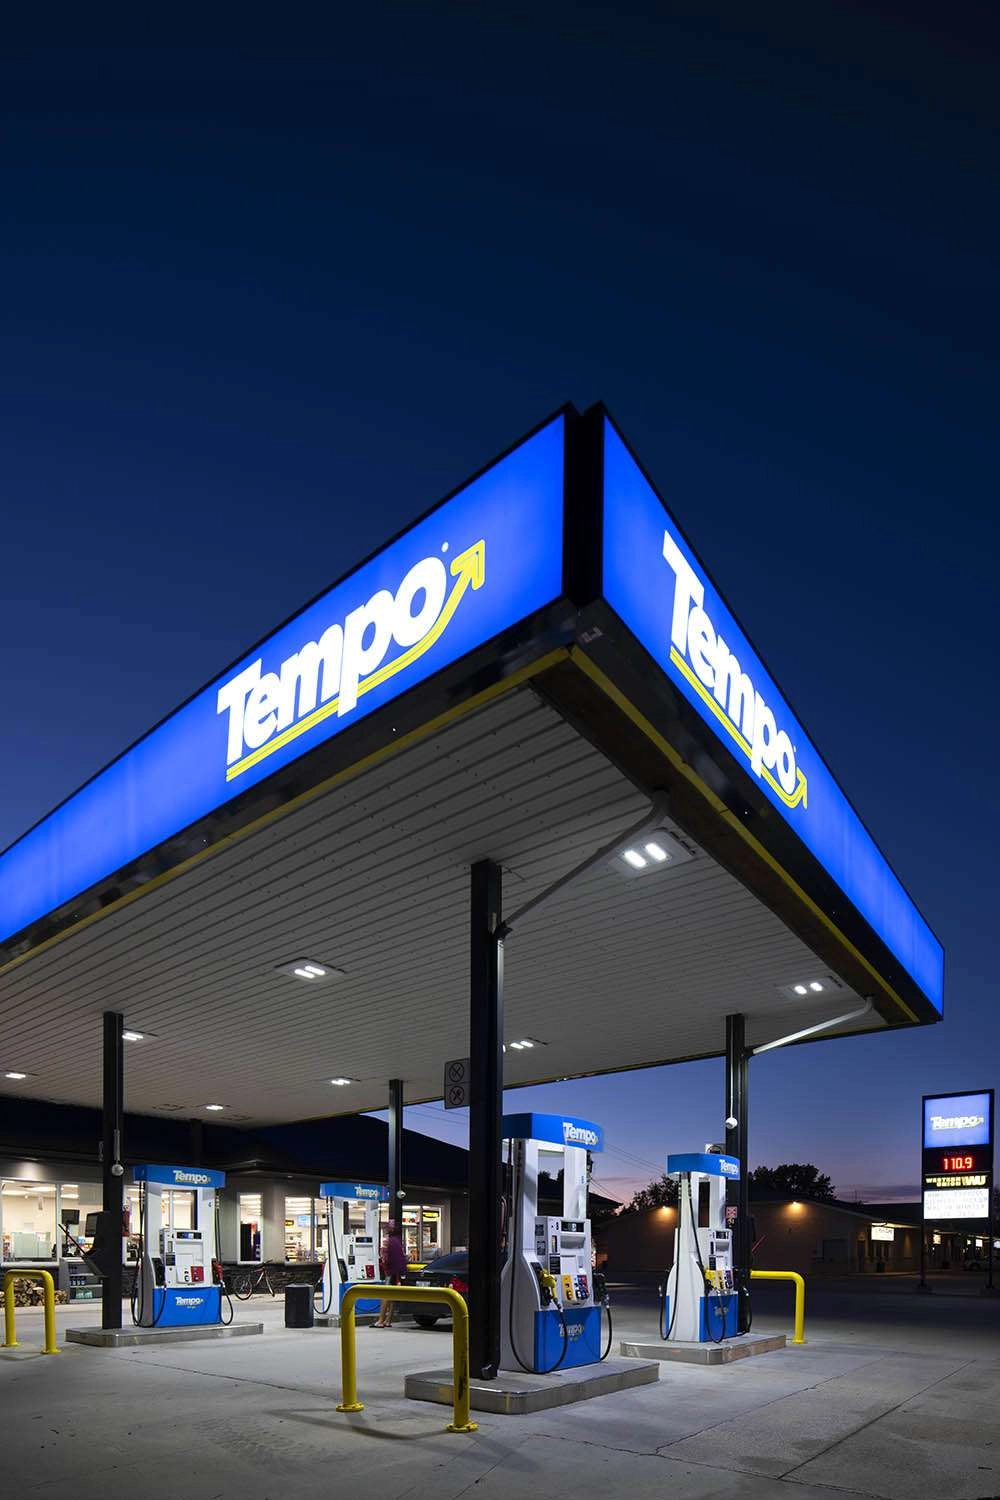 A vertical of the gas station at night. © robert lowdon